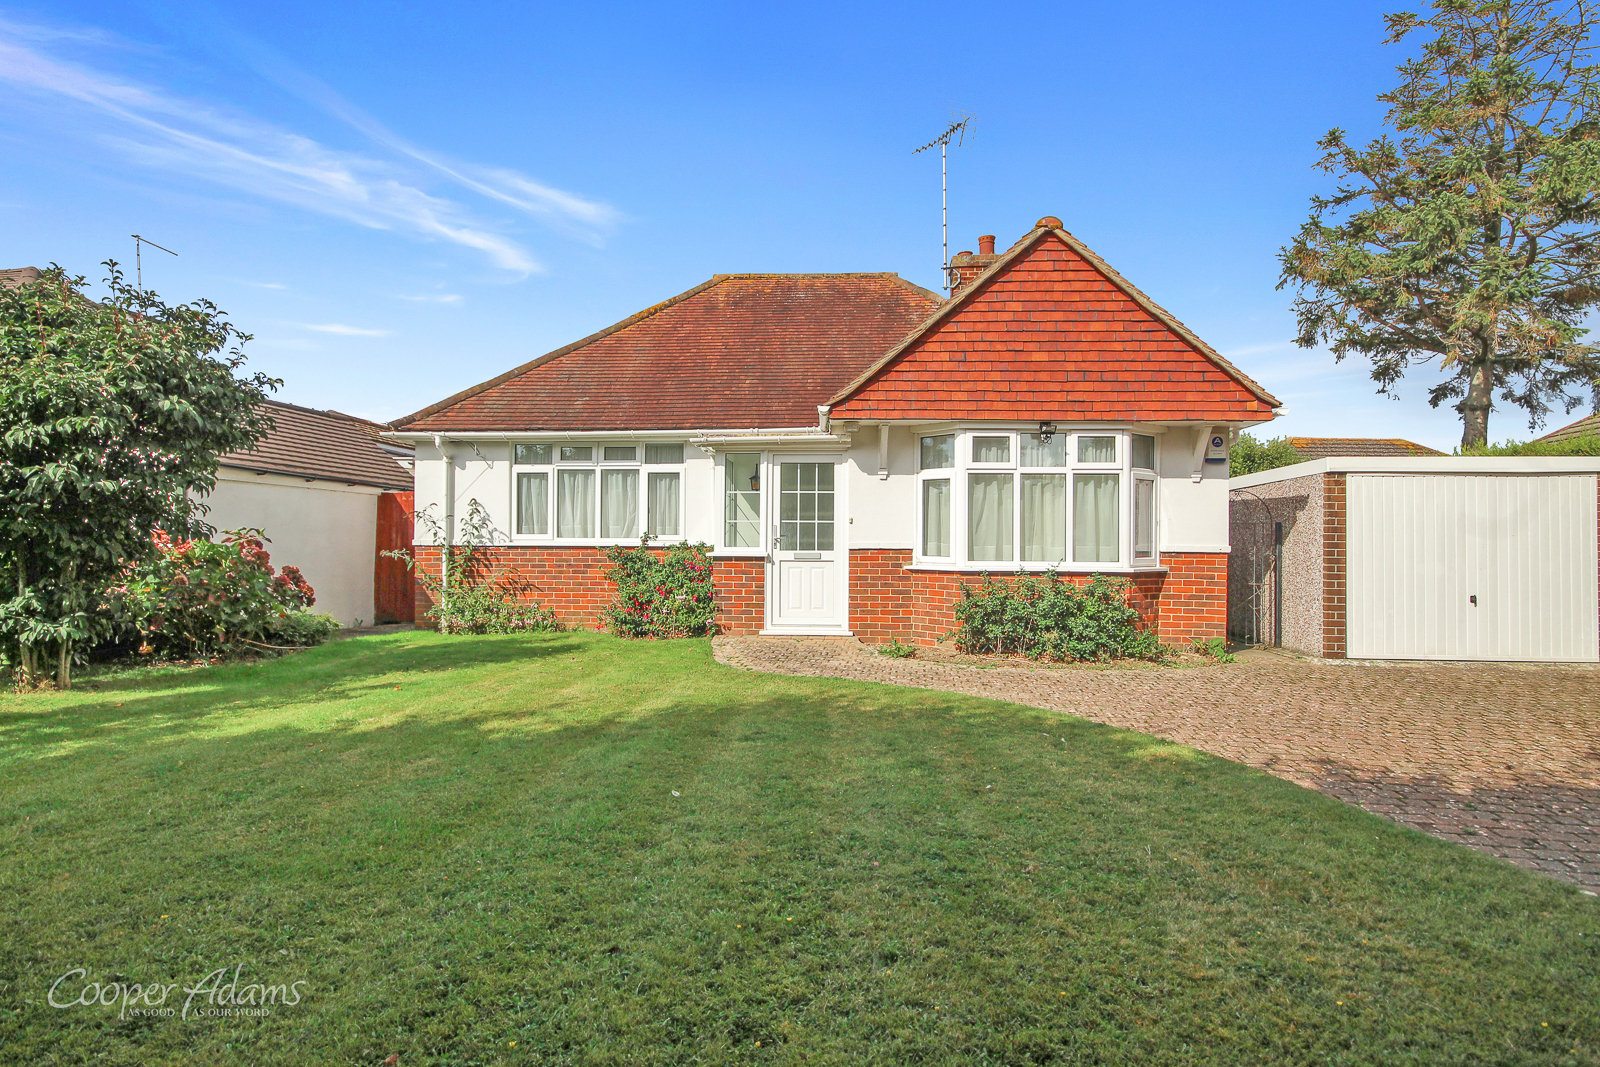 3 bed bungalow for sale in North Lane, East Preston 0